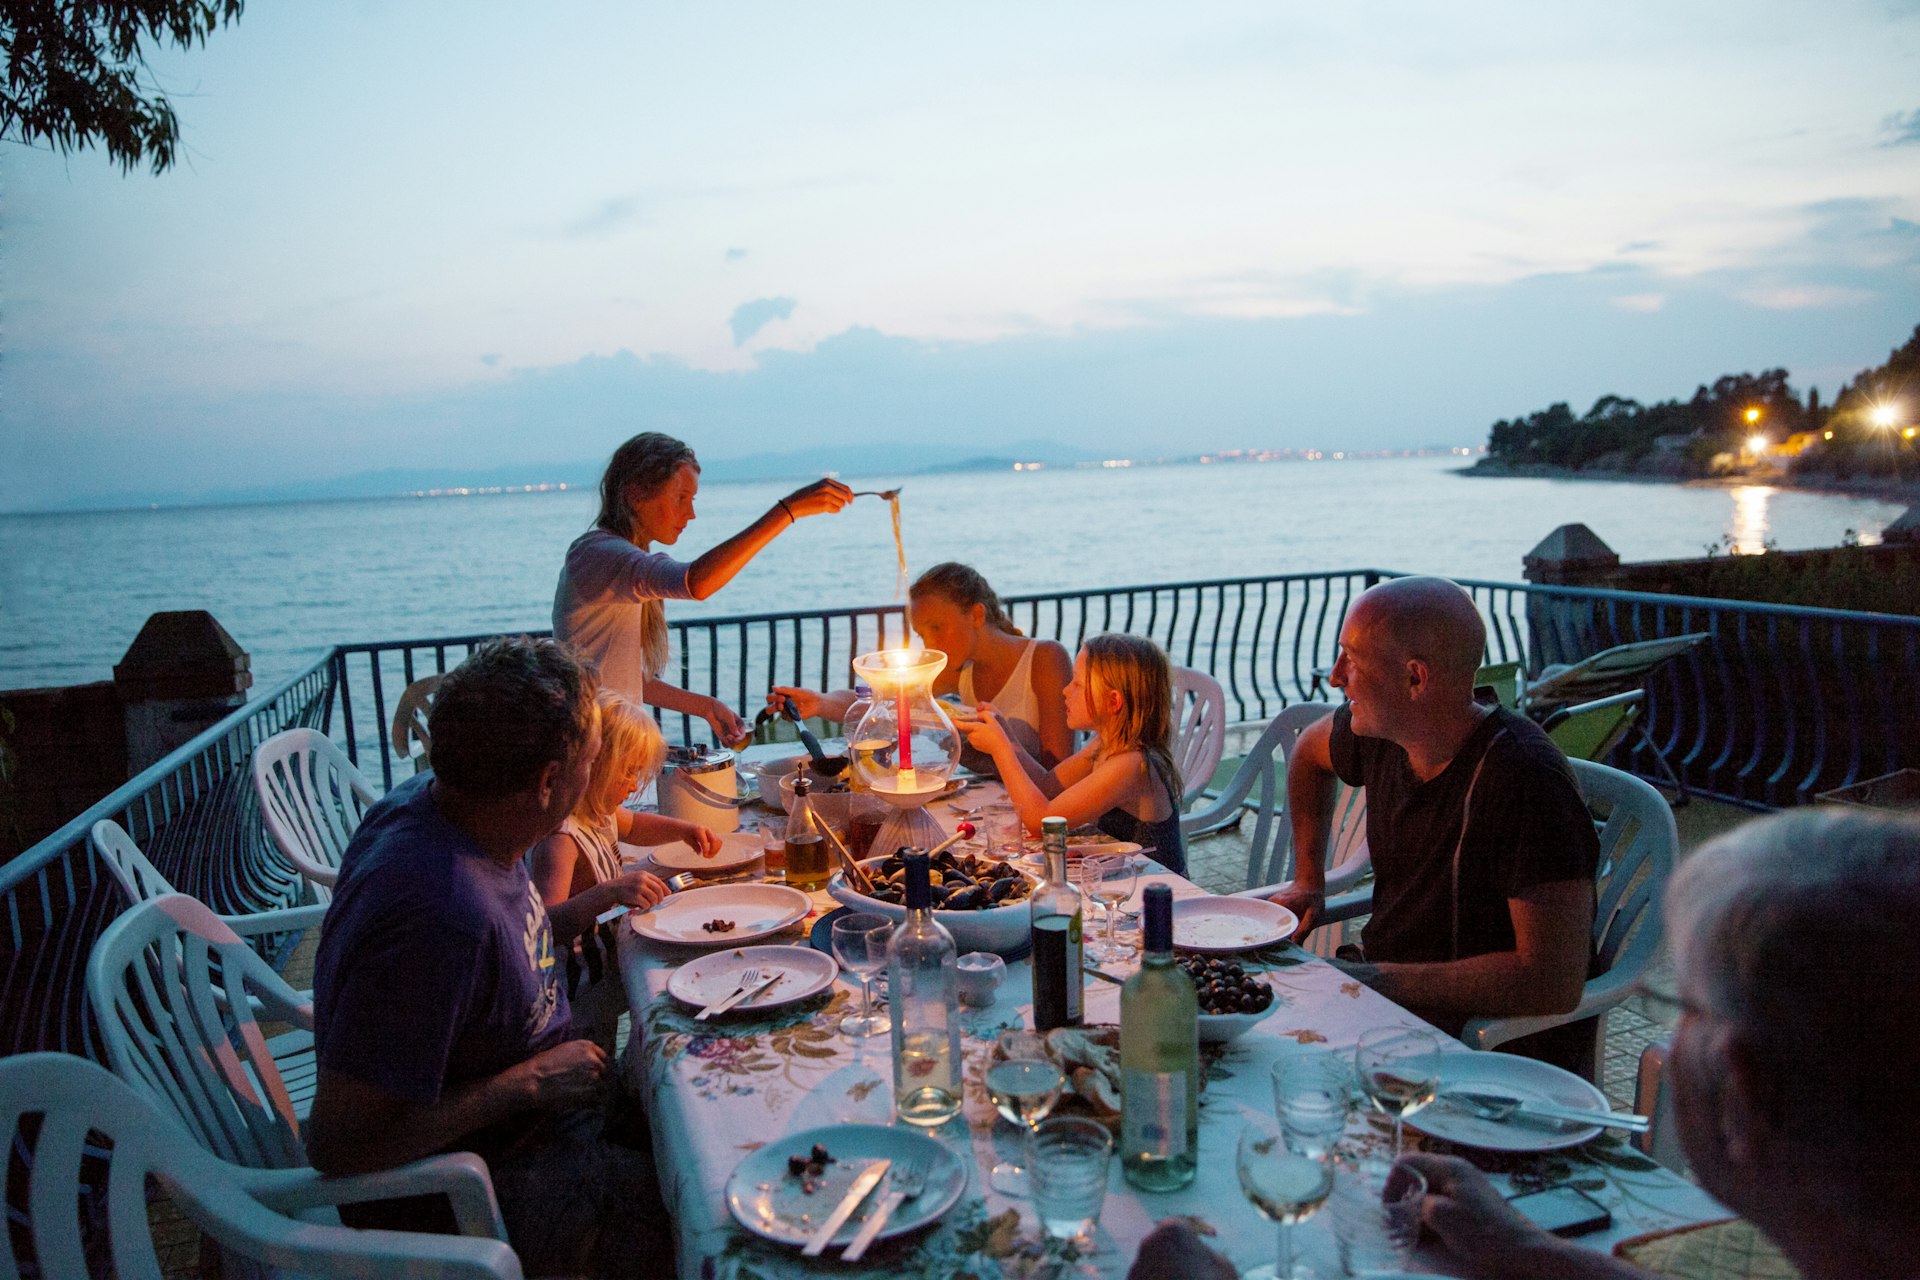 A family with several children ranging in ages and adults eat together at a table next to the sea